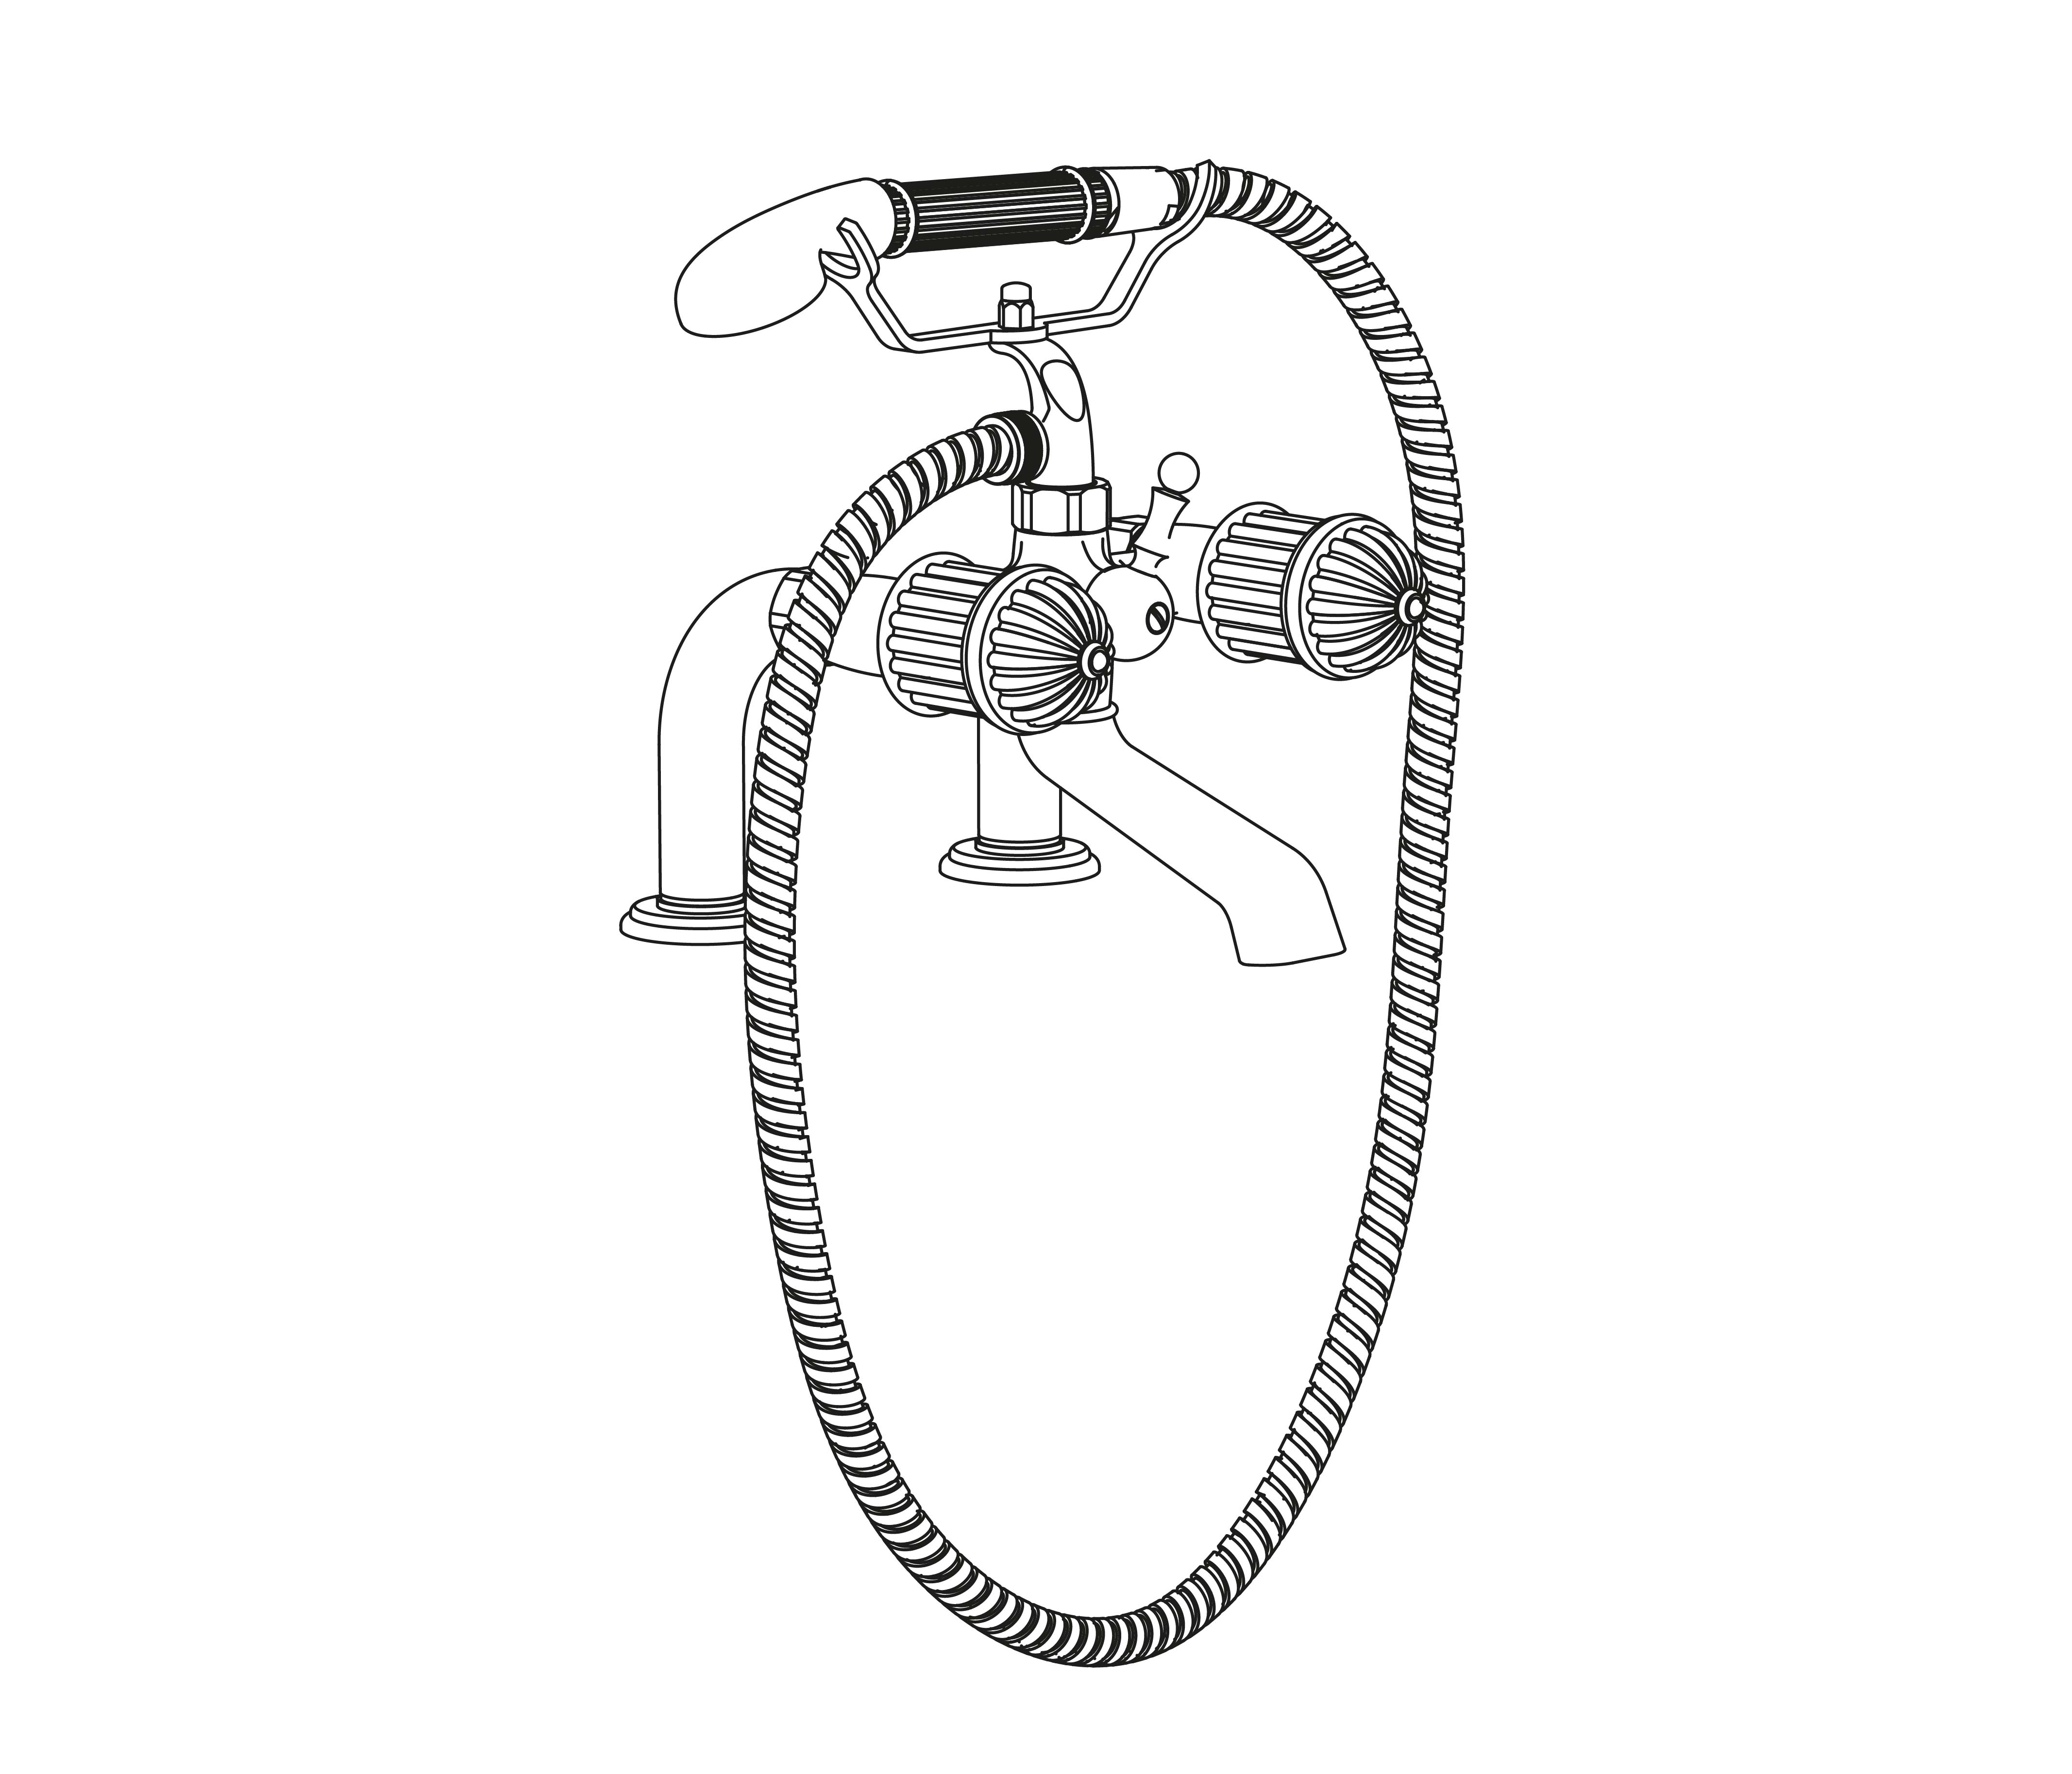 S181-3306 Rim mounted bath and shower mixer